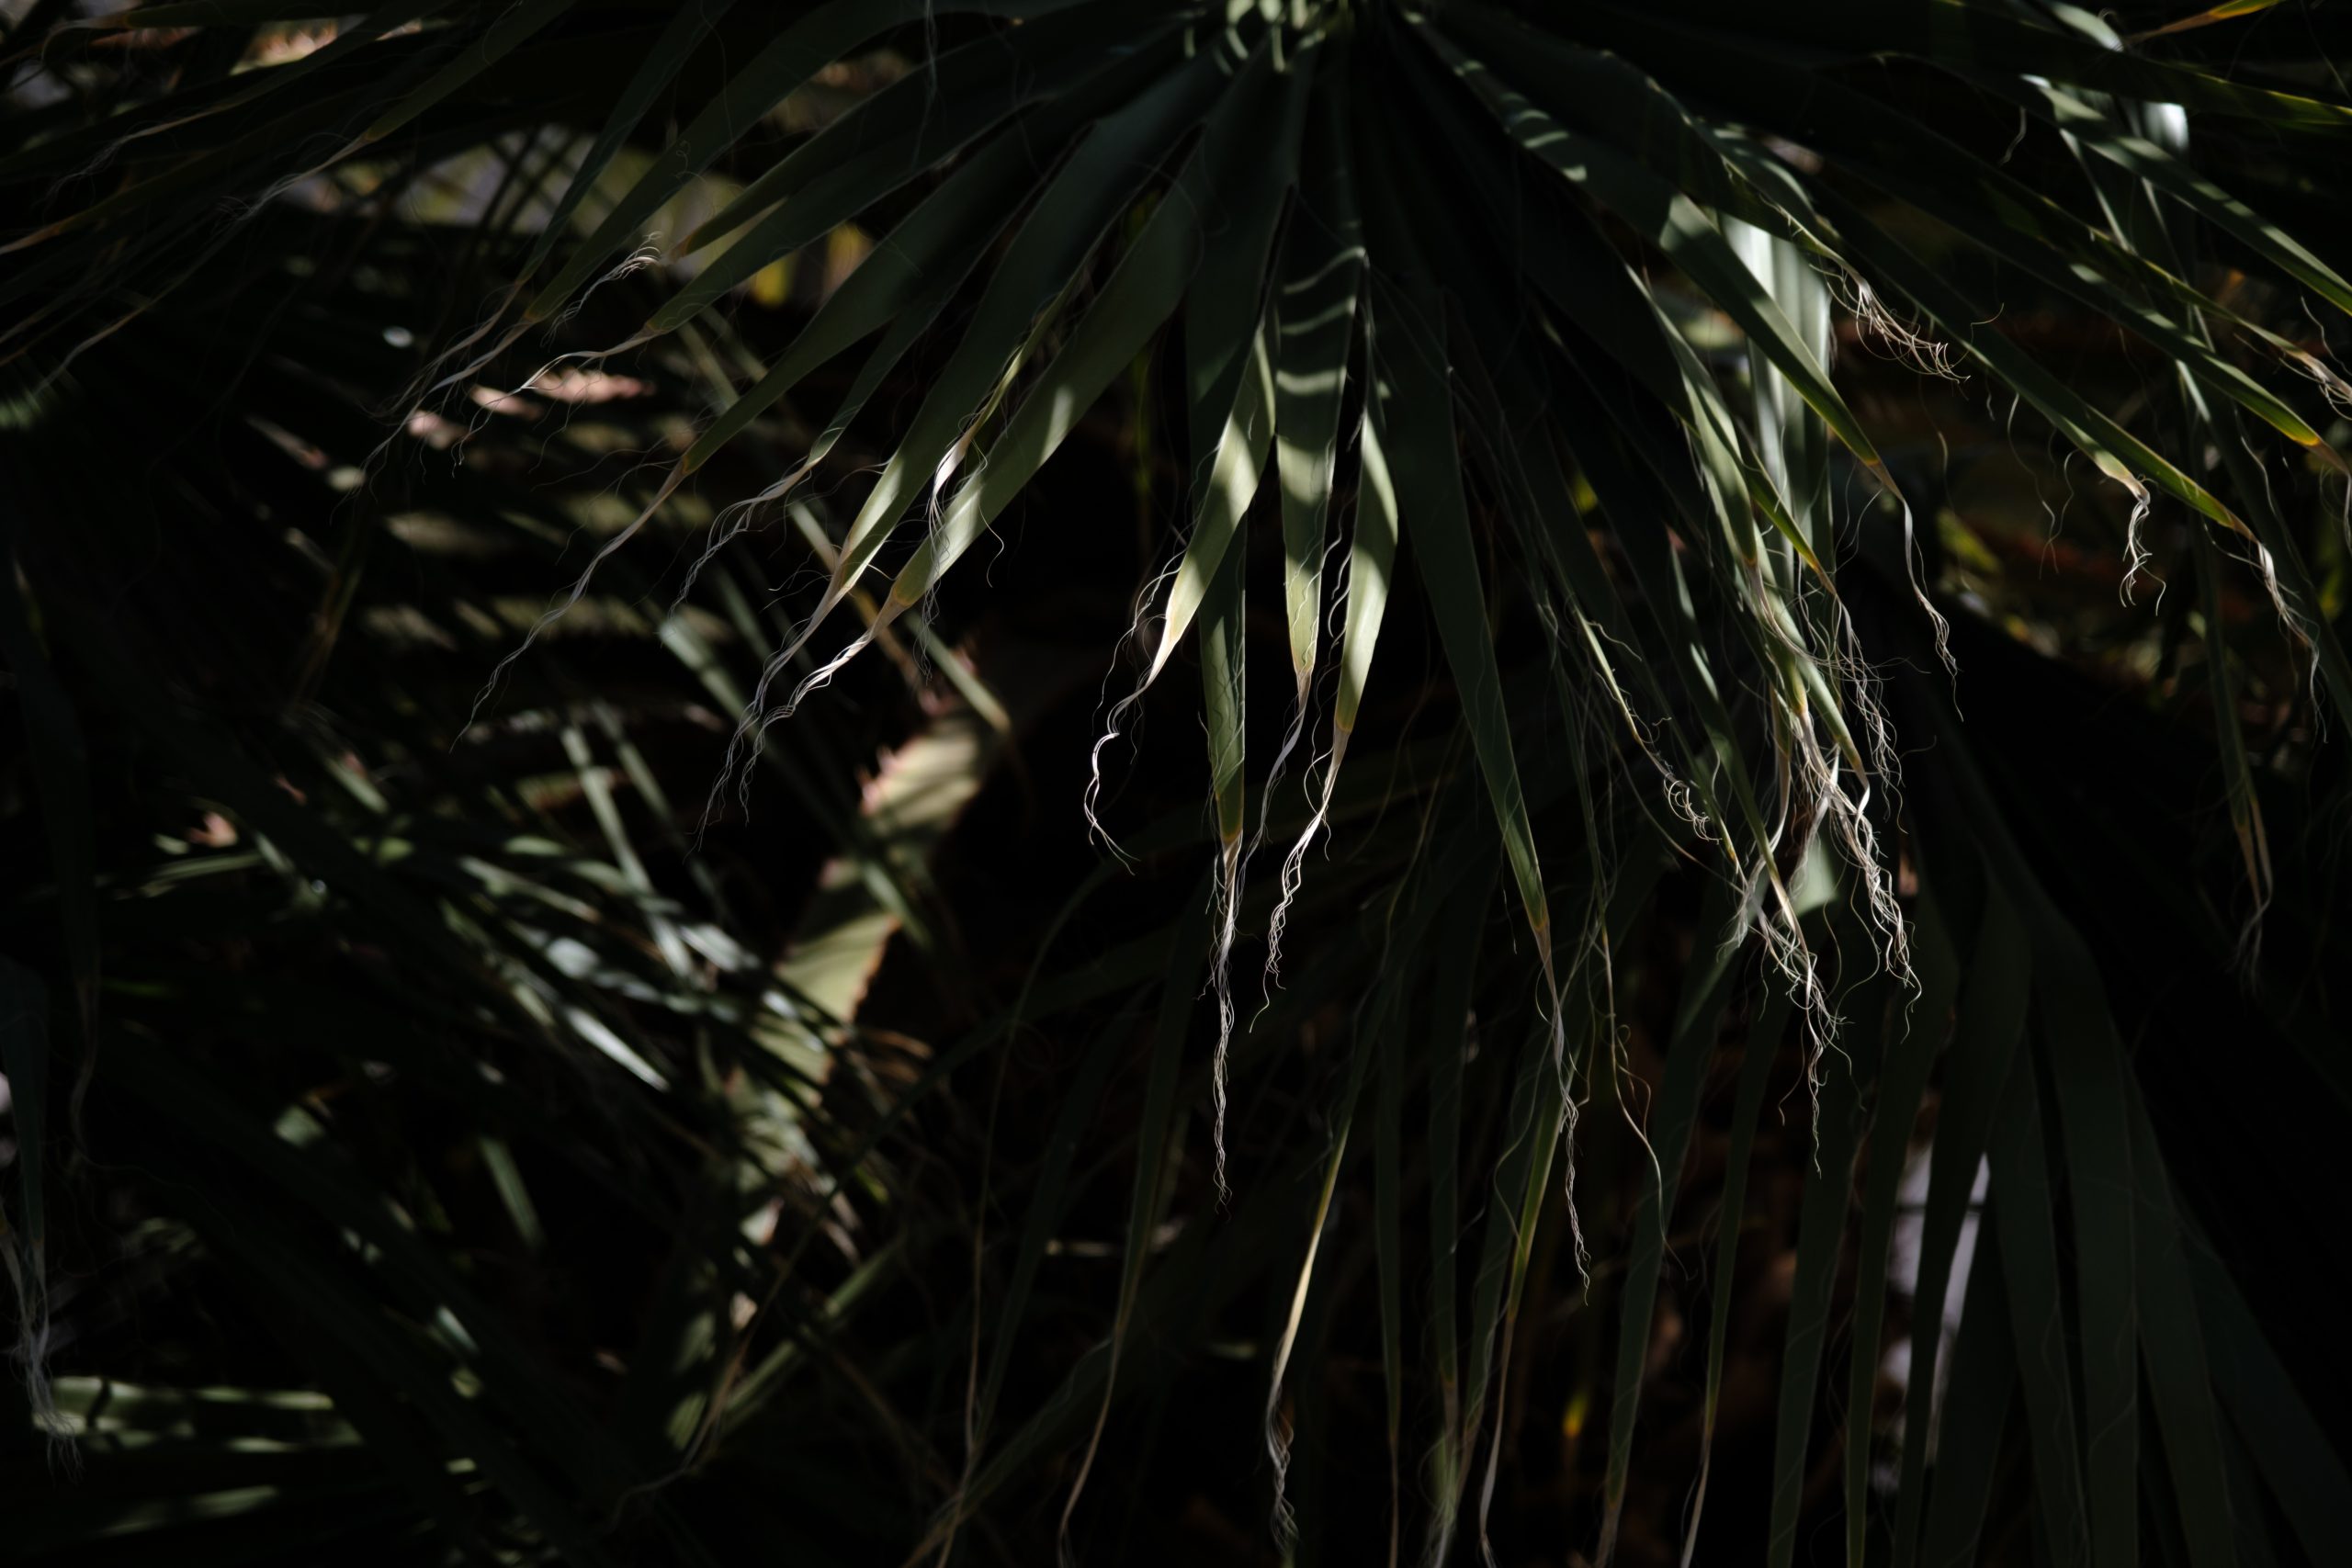 Photograph of a close up of palm tree leaves shrouded in shadows.